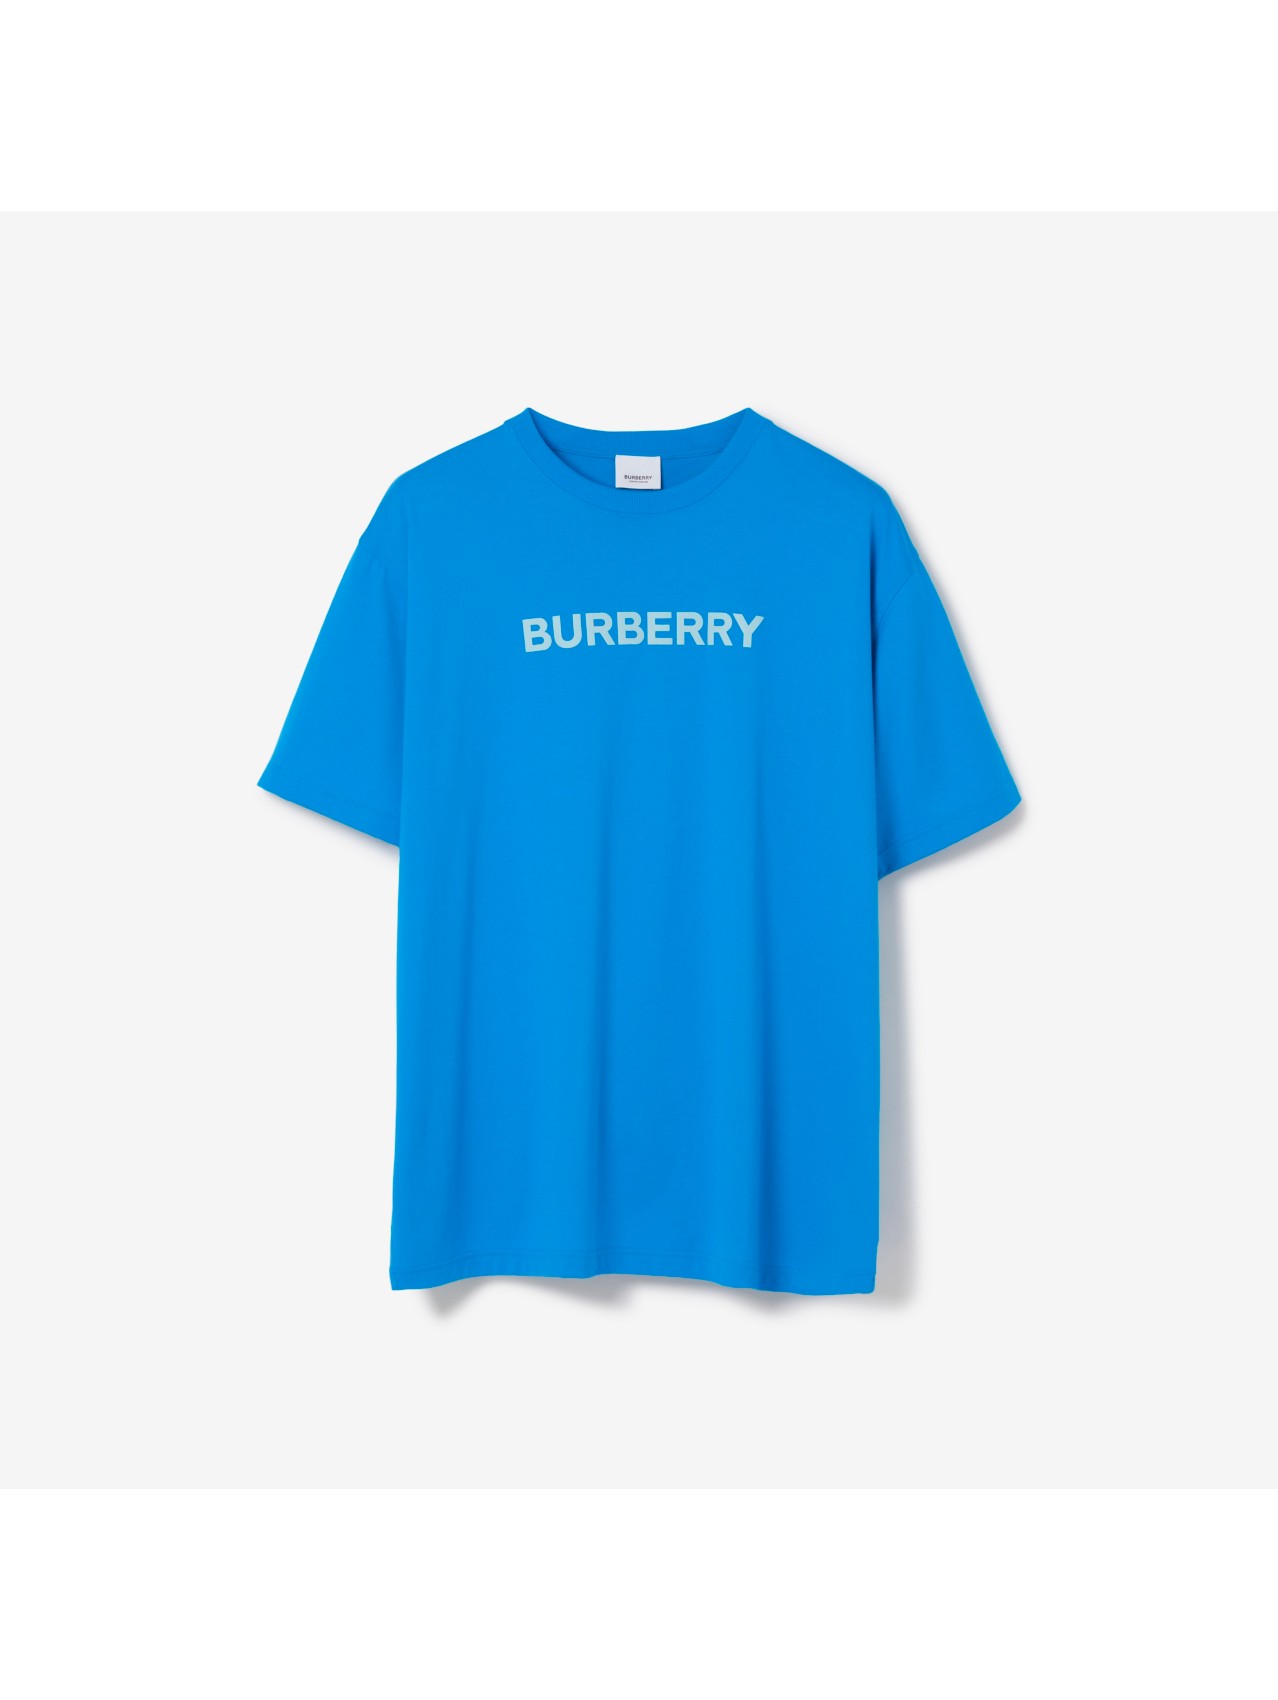 Men's New Arrivals | Burberry New In | Burberry® Official